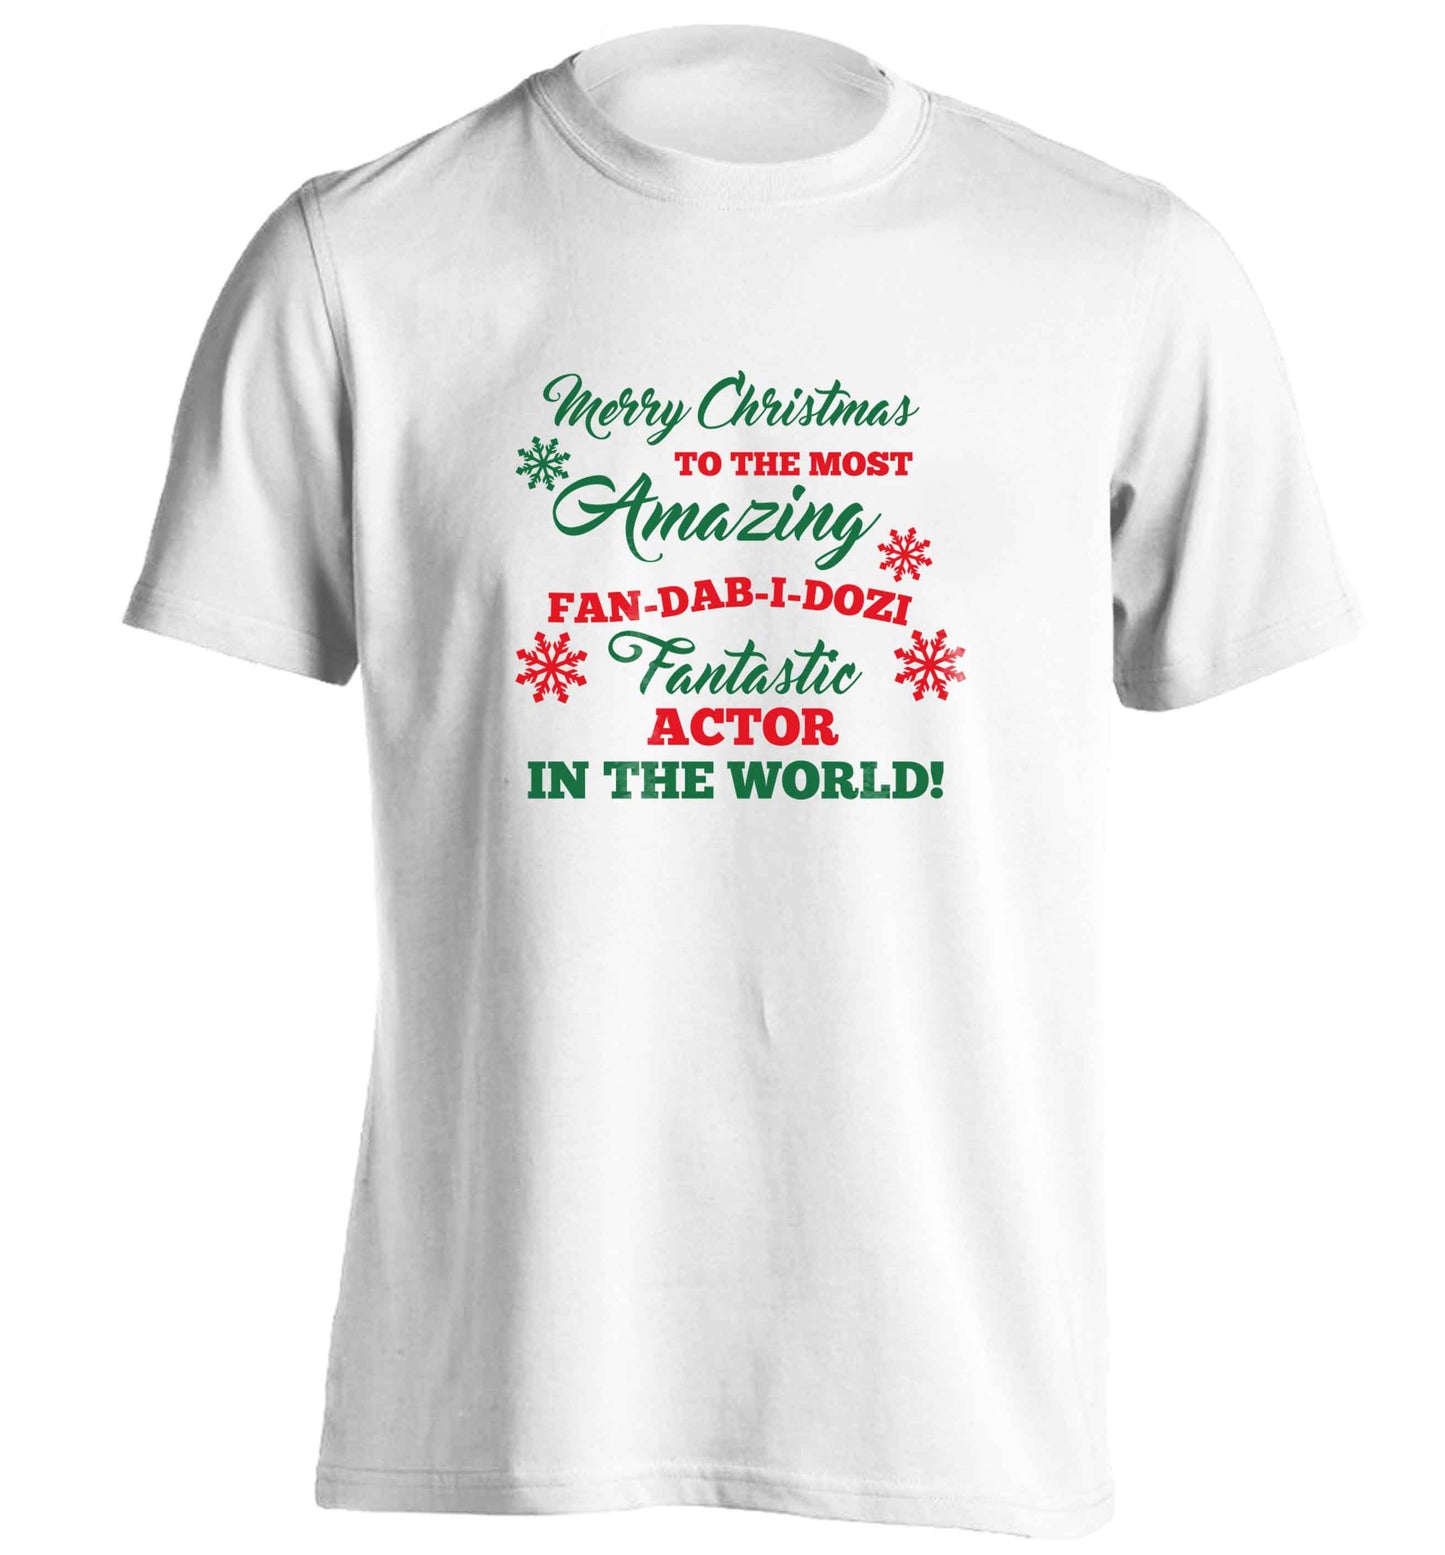 Merry Christmas to the most amazing actor in the world! adults unisex white Tshirt 2XL